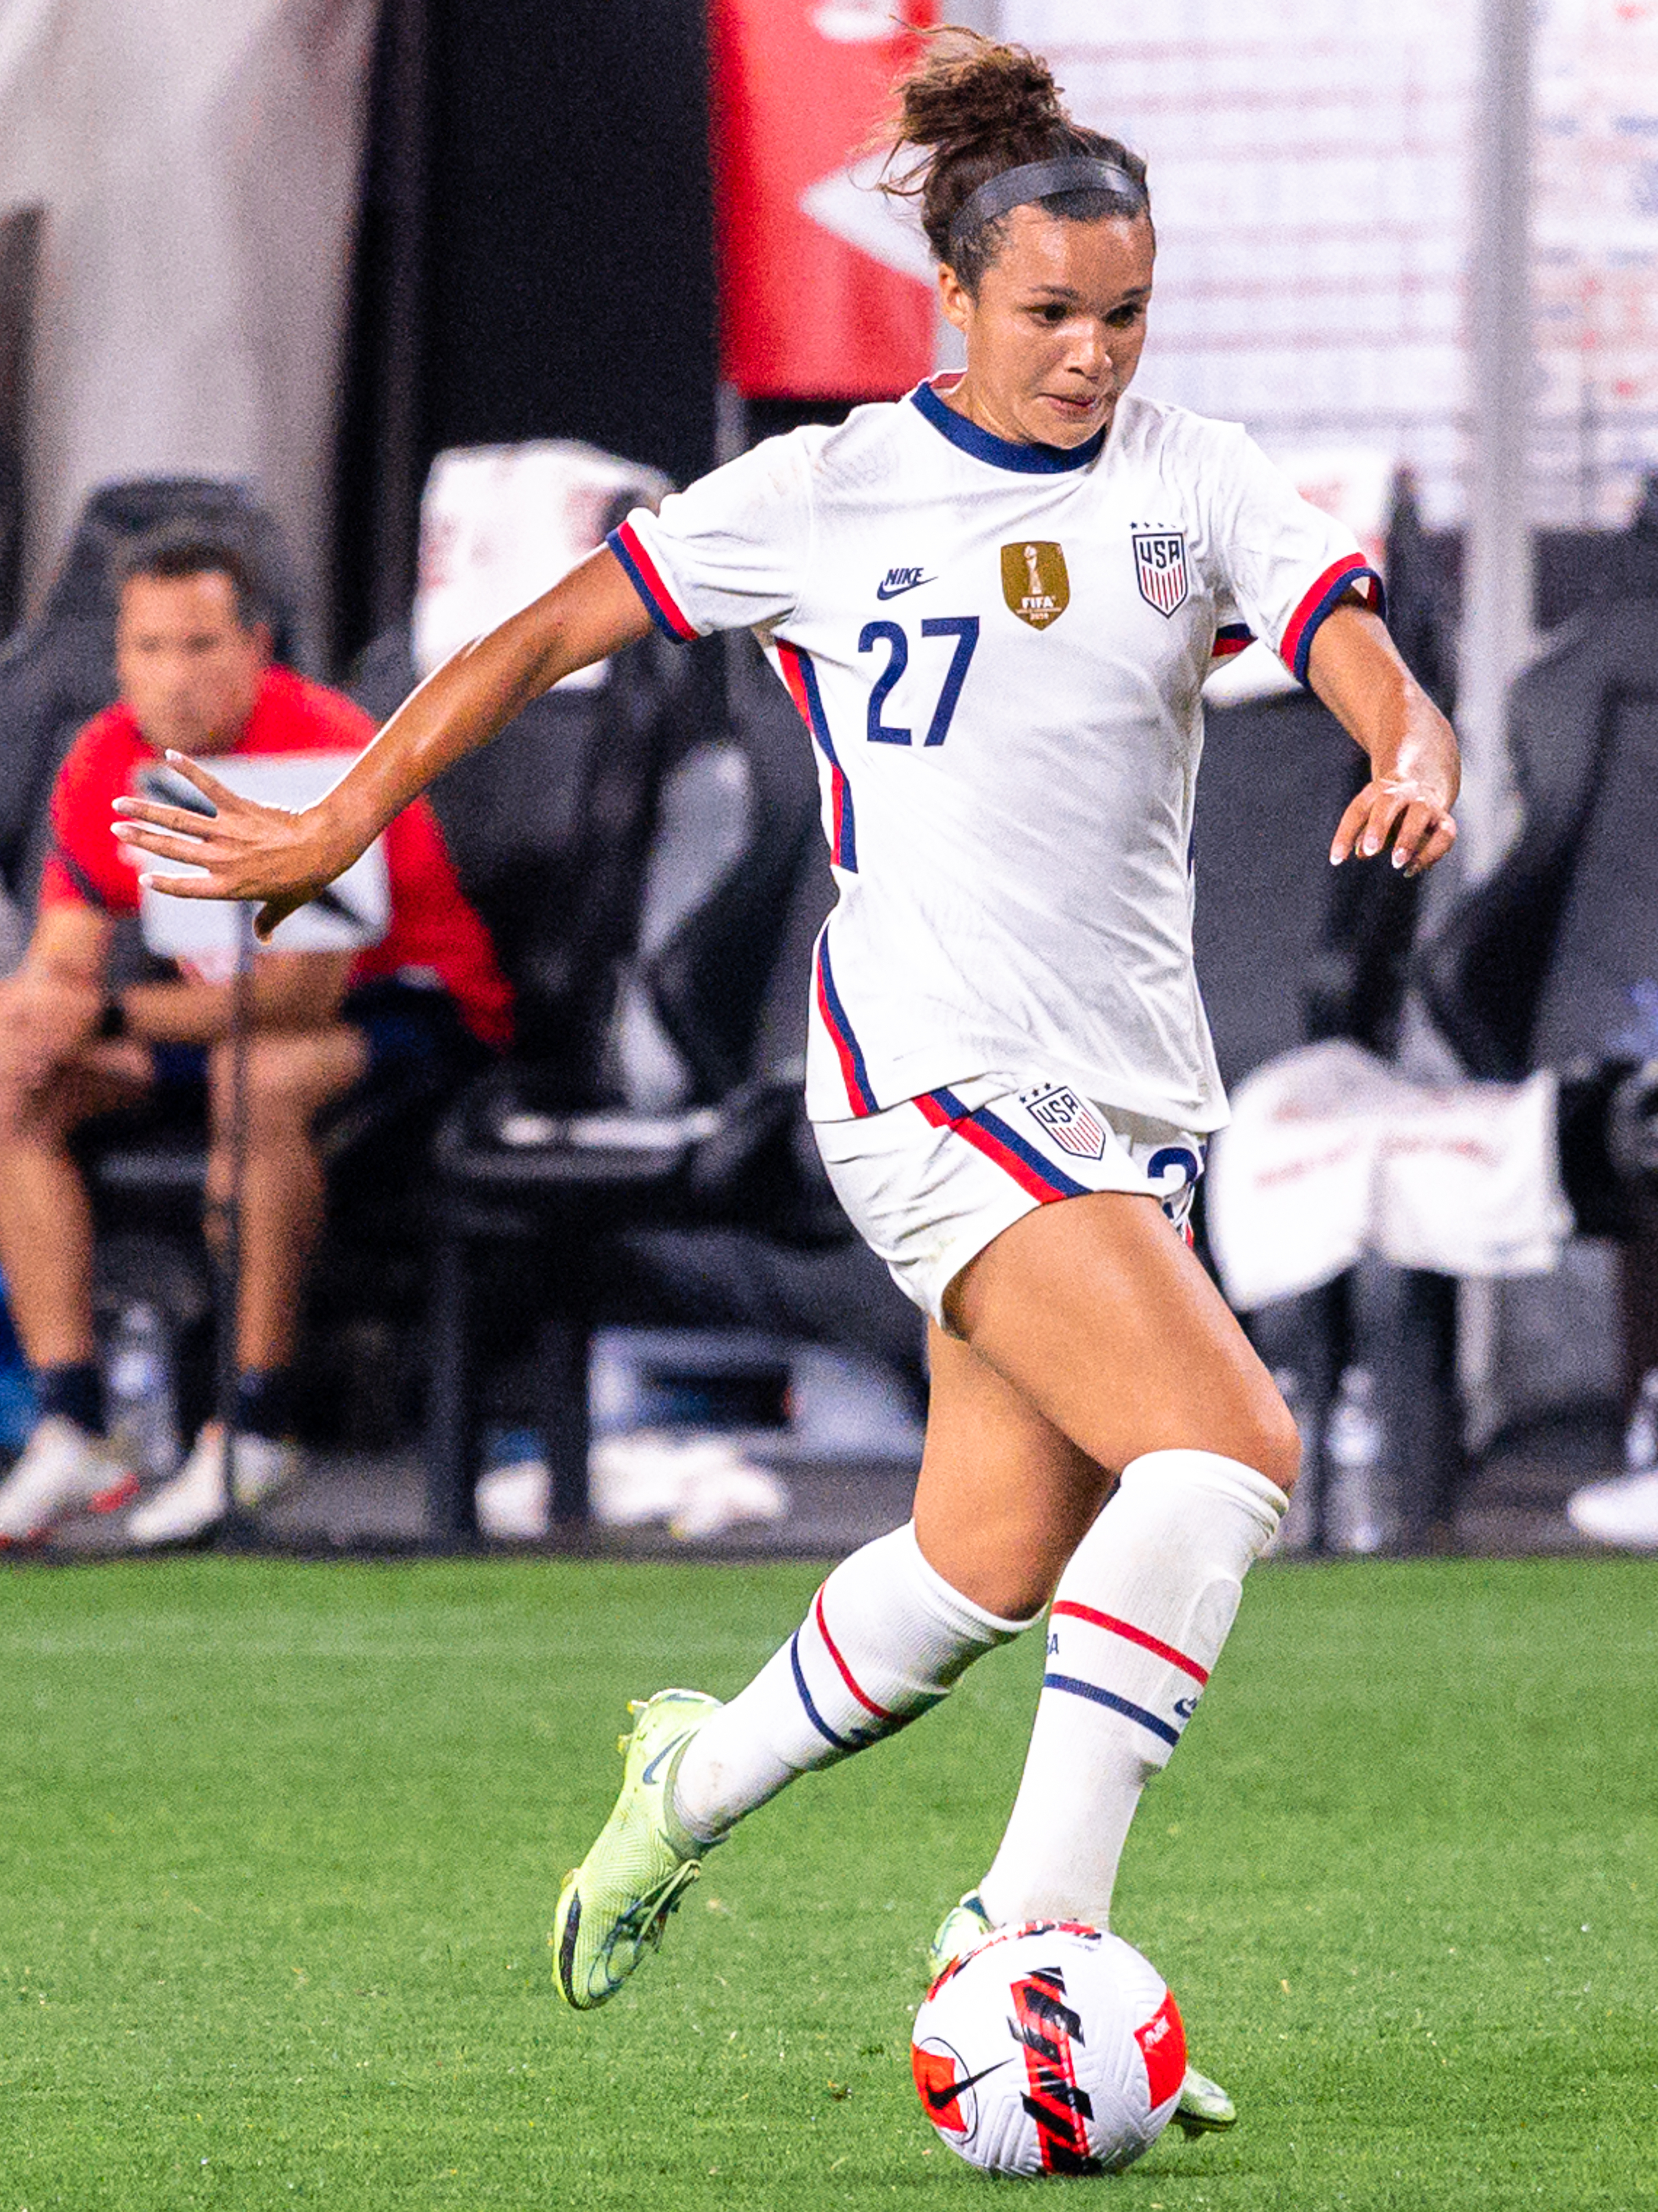 U.S. soccer team roster for the 2019 Women's World Cup – The Denver Post